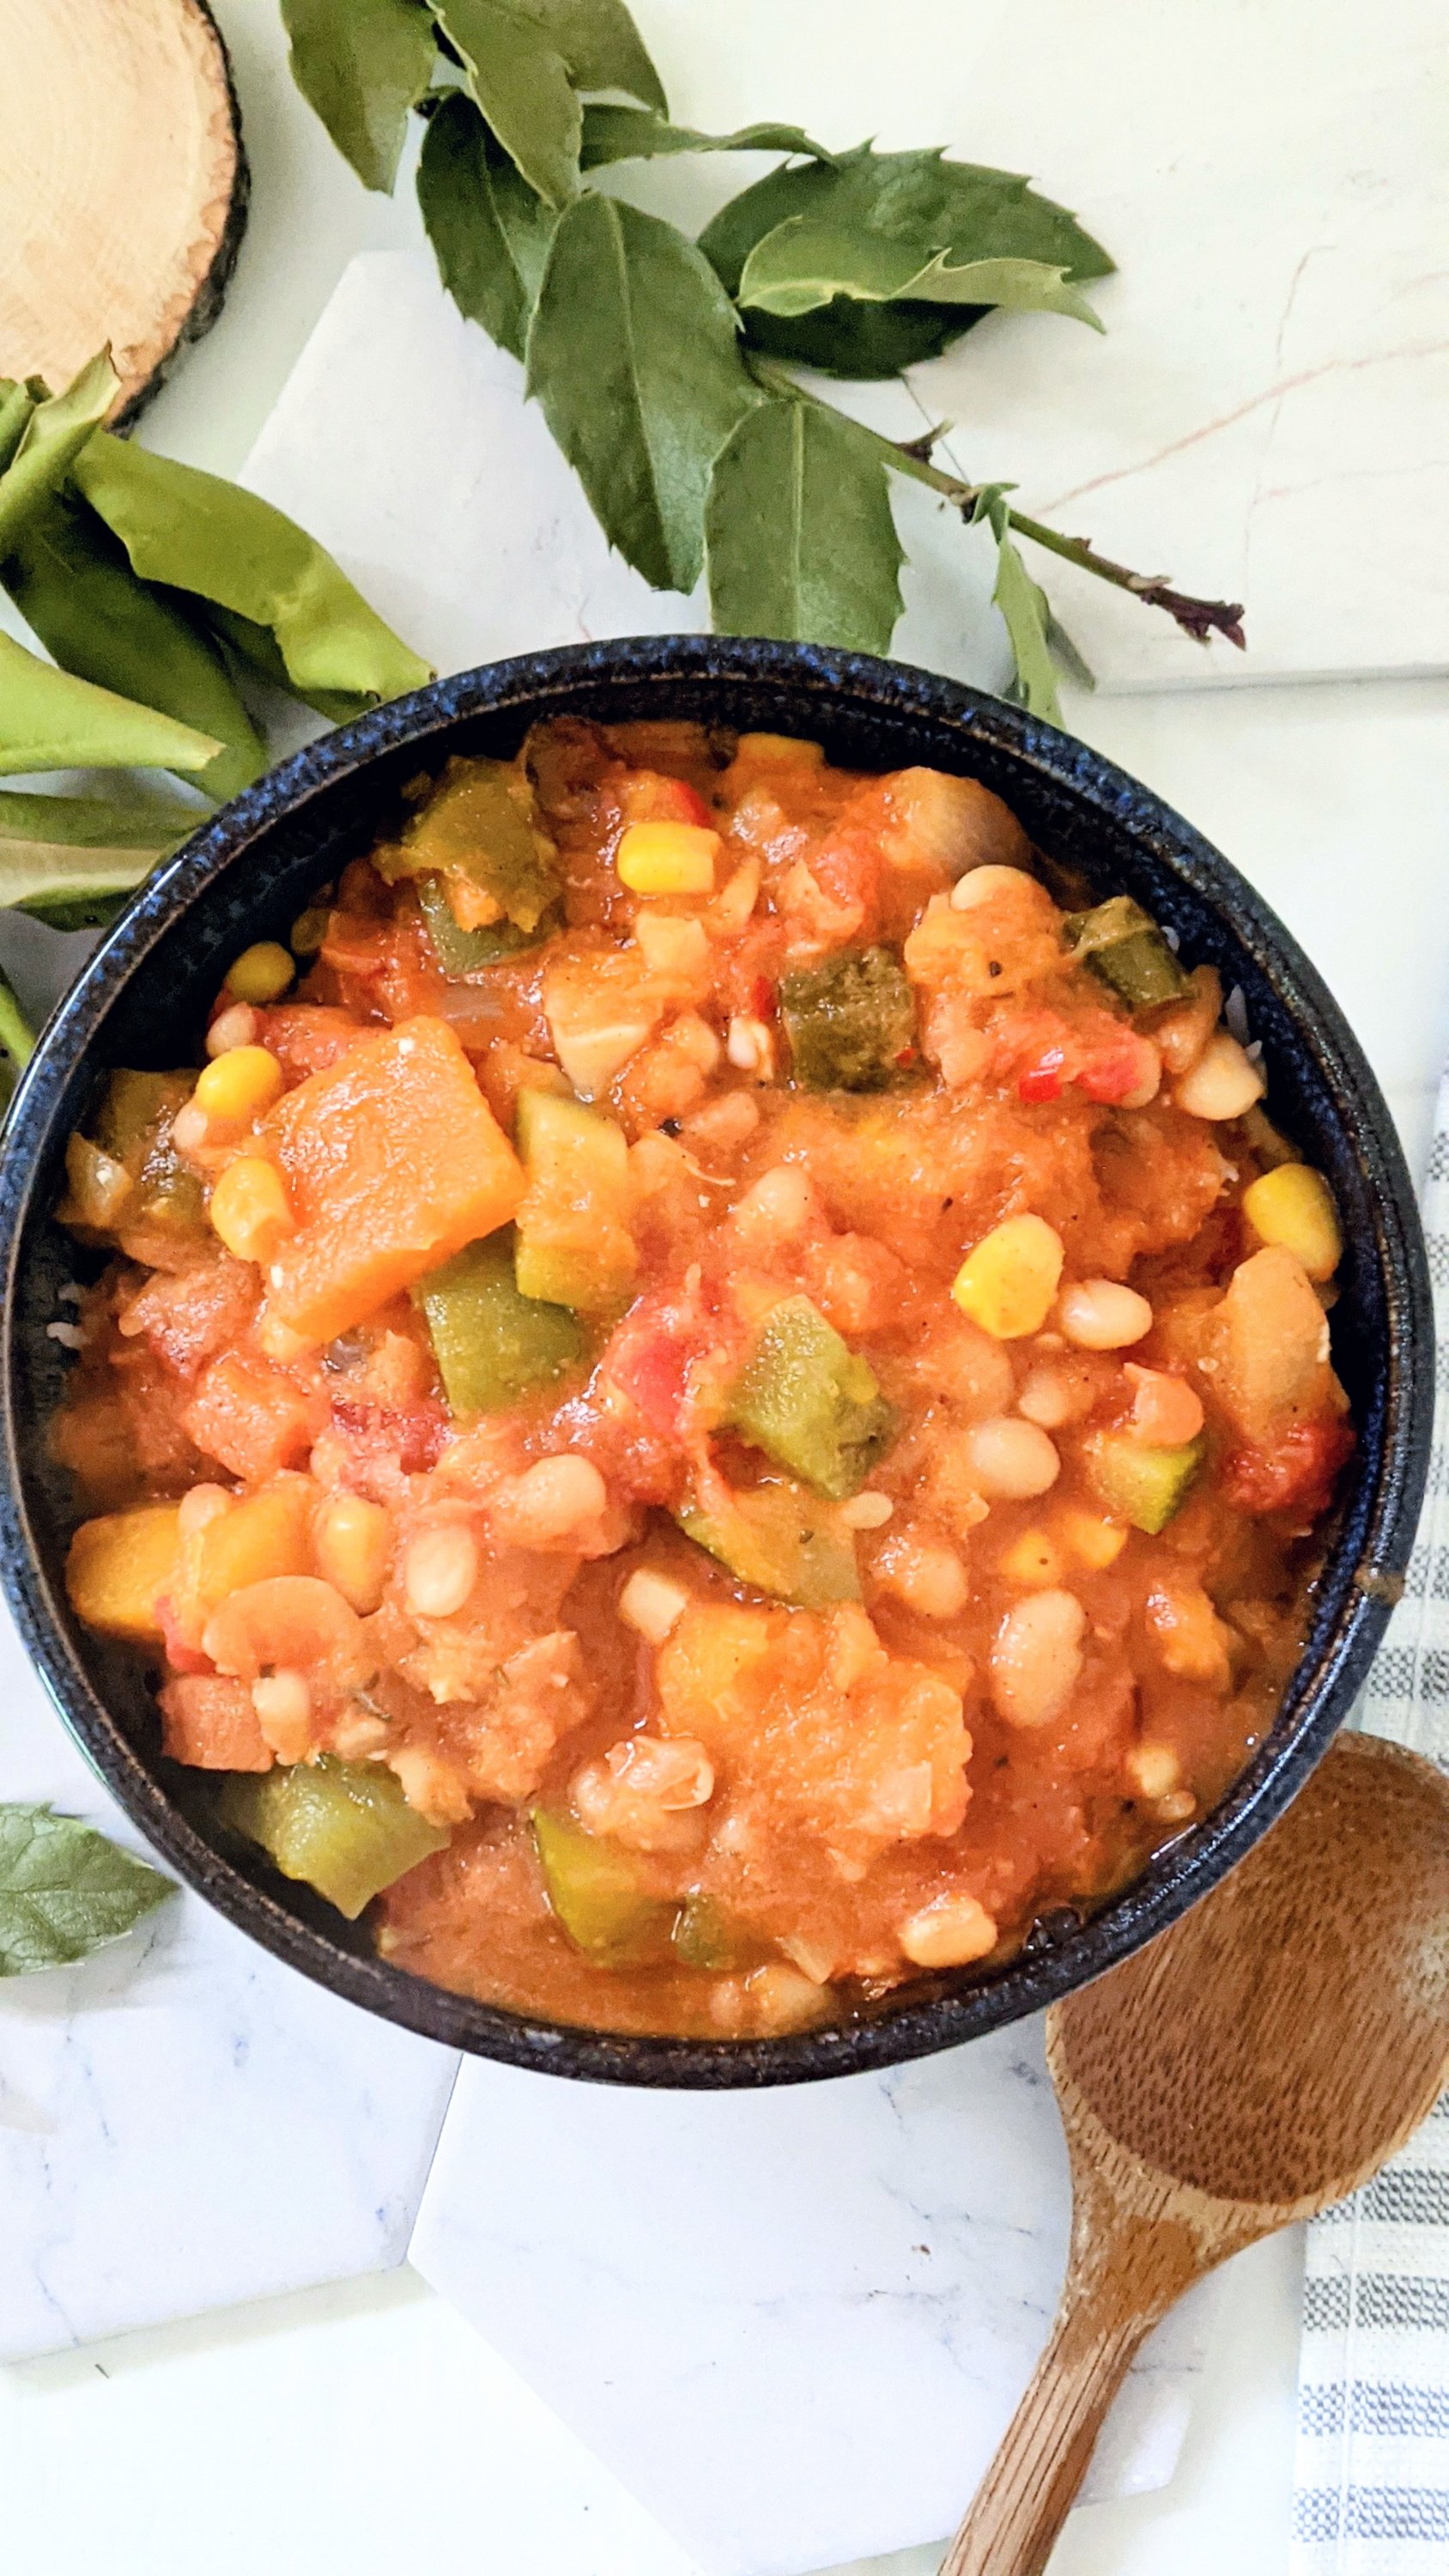 three sisters stew vegan gluten free summer stew recipes with corn squash beans okra tomatoes plant based proten whole foods plant based recipes for summer vegan healthy dinner ideas